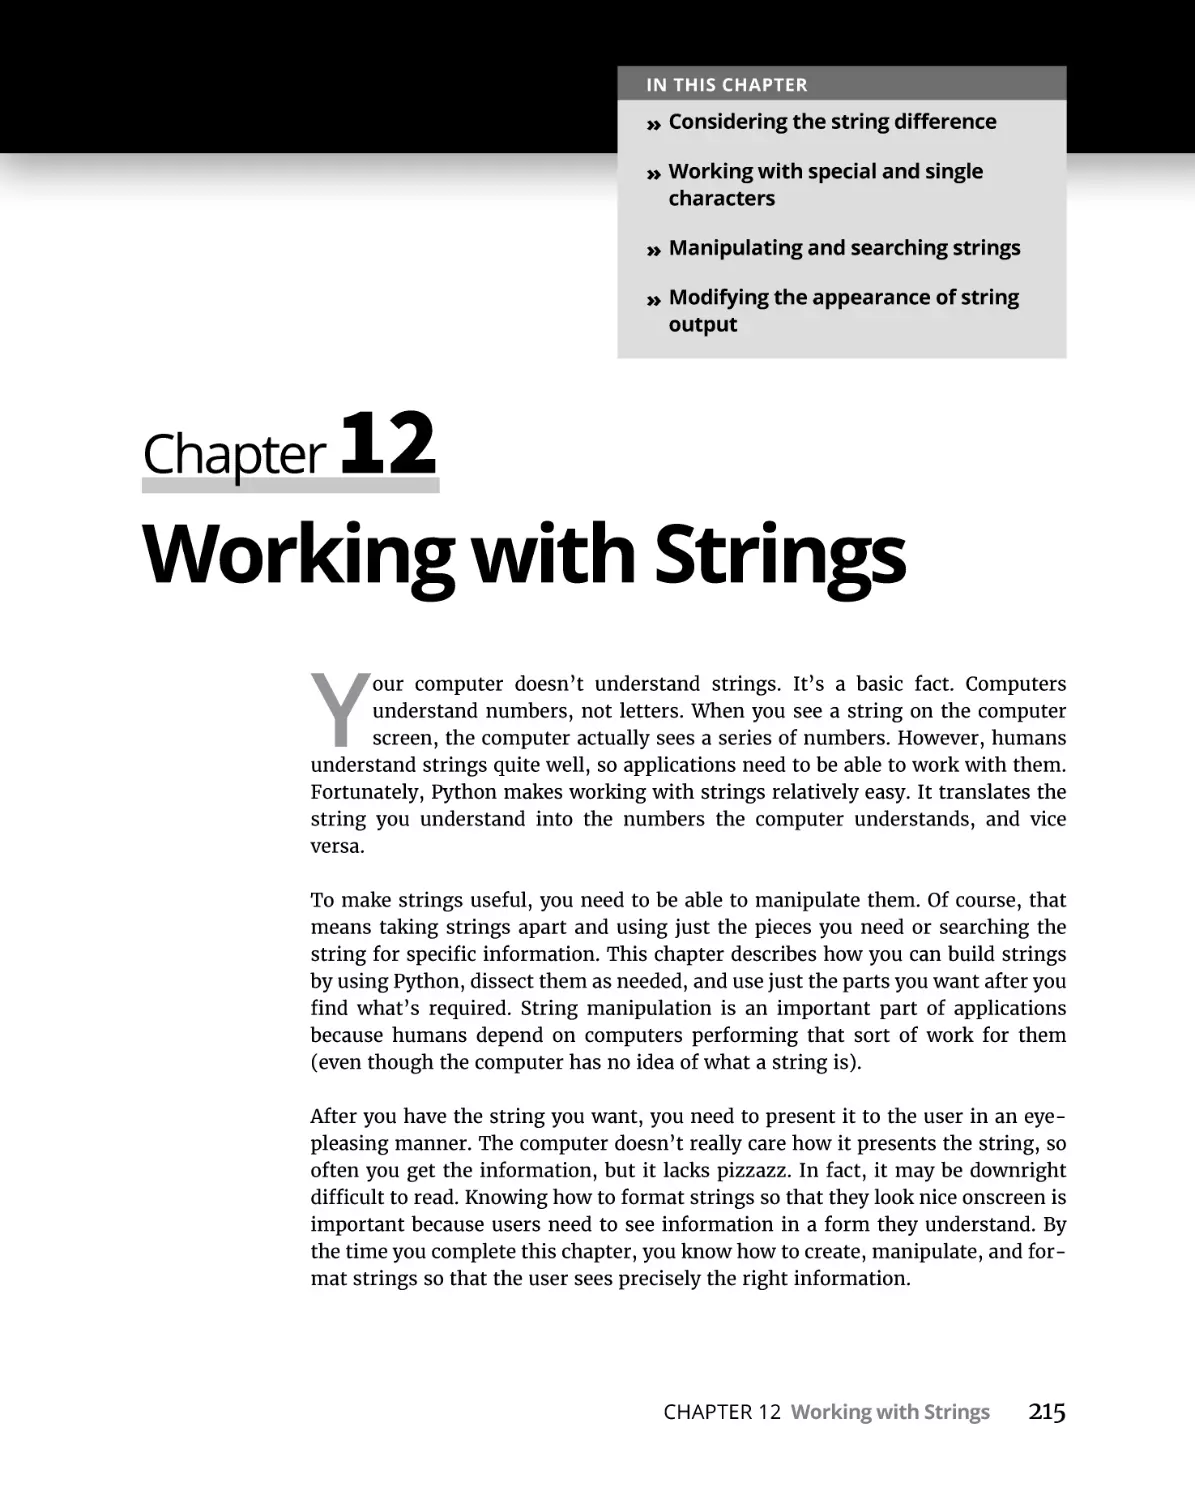 Chapter 12 Working with Strings